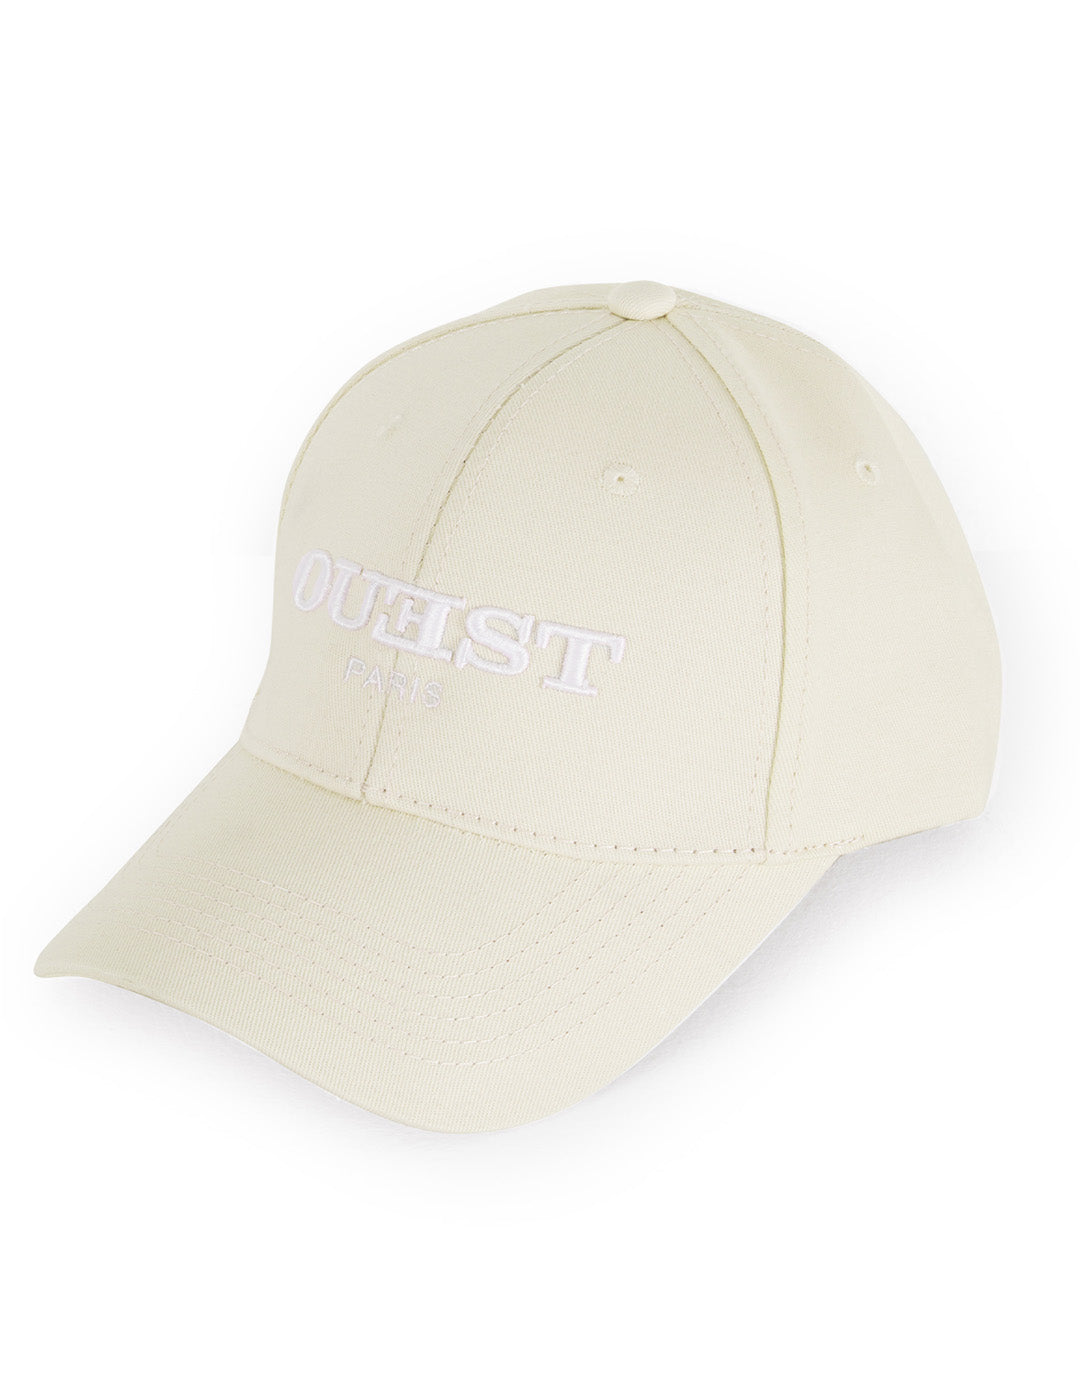 THE LOGO BASEBALL HAT IN OFF-WHITE COTTON